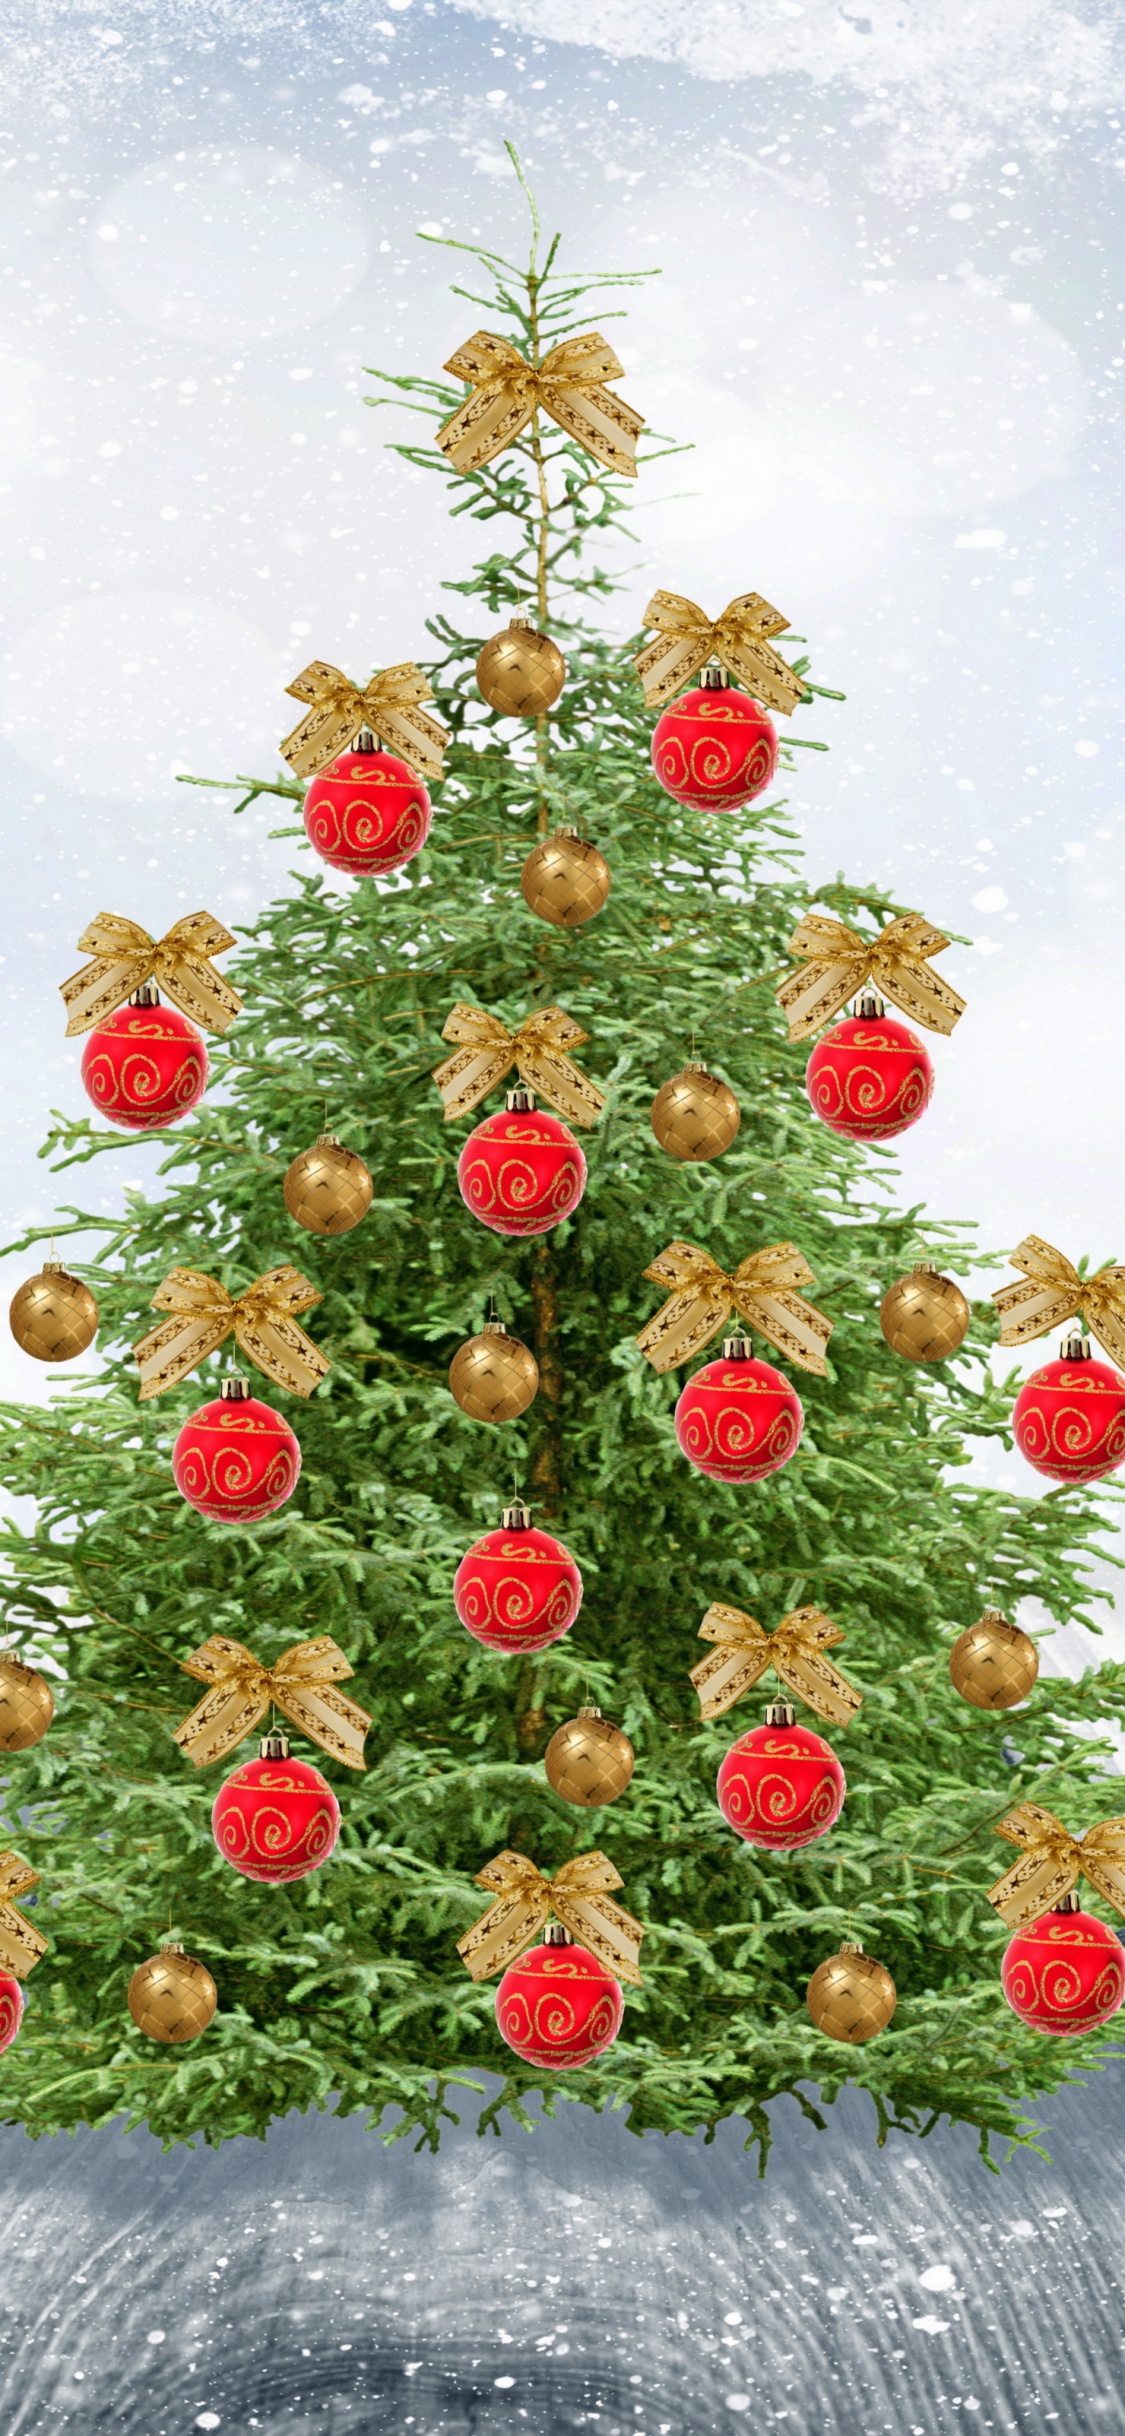 New Year, Christmas Day, Santa Claus, Christmas Tree, Christmas Decoration. Wallpaper in 1125x2436 Resolution